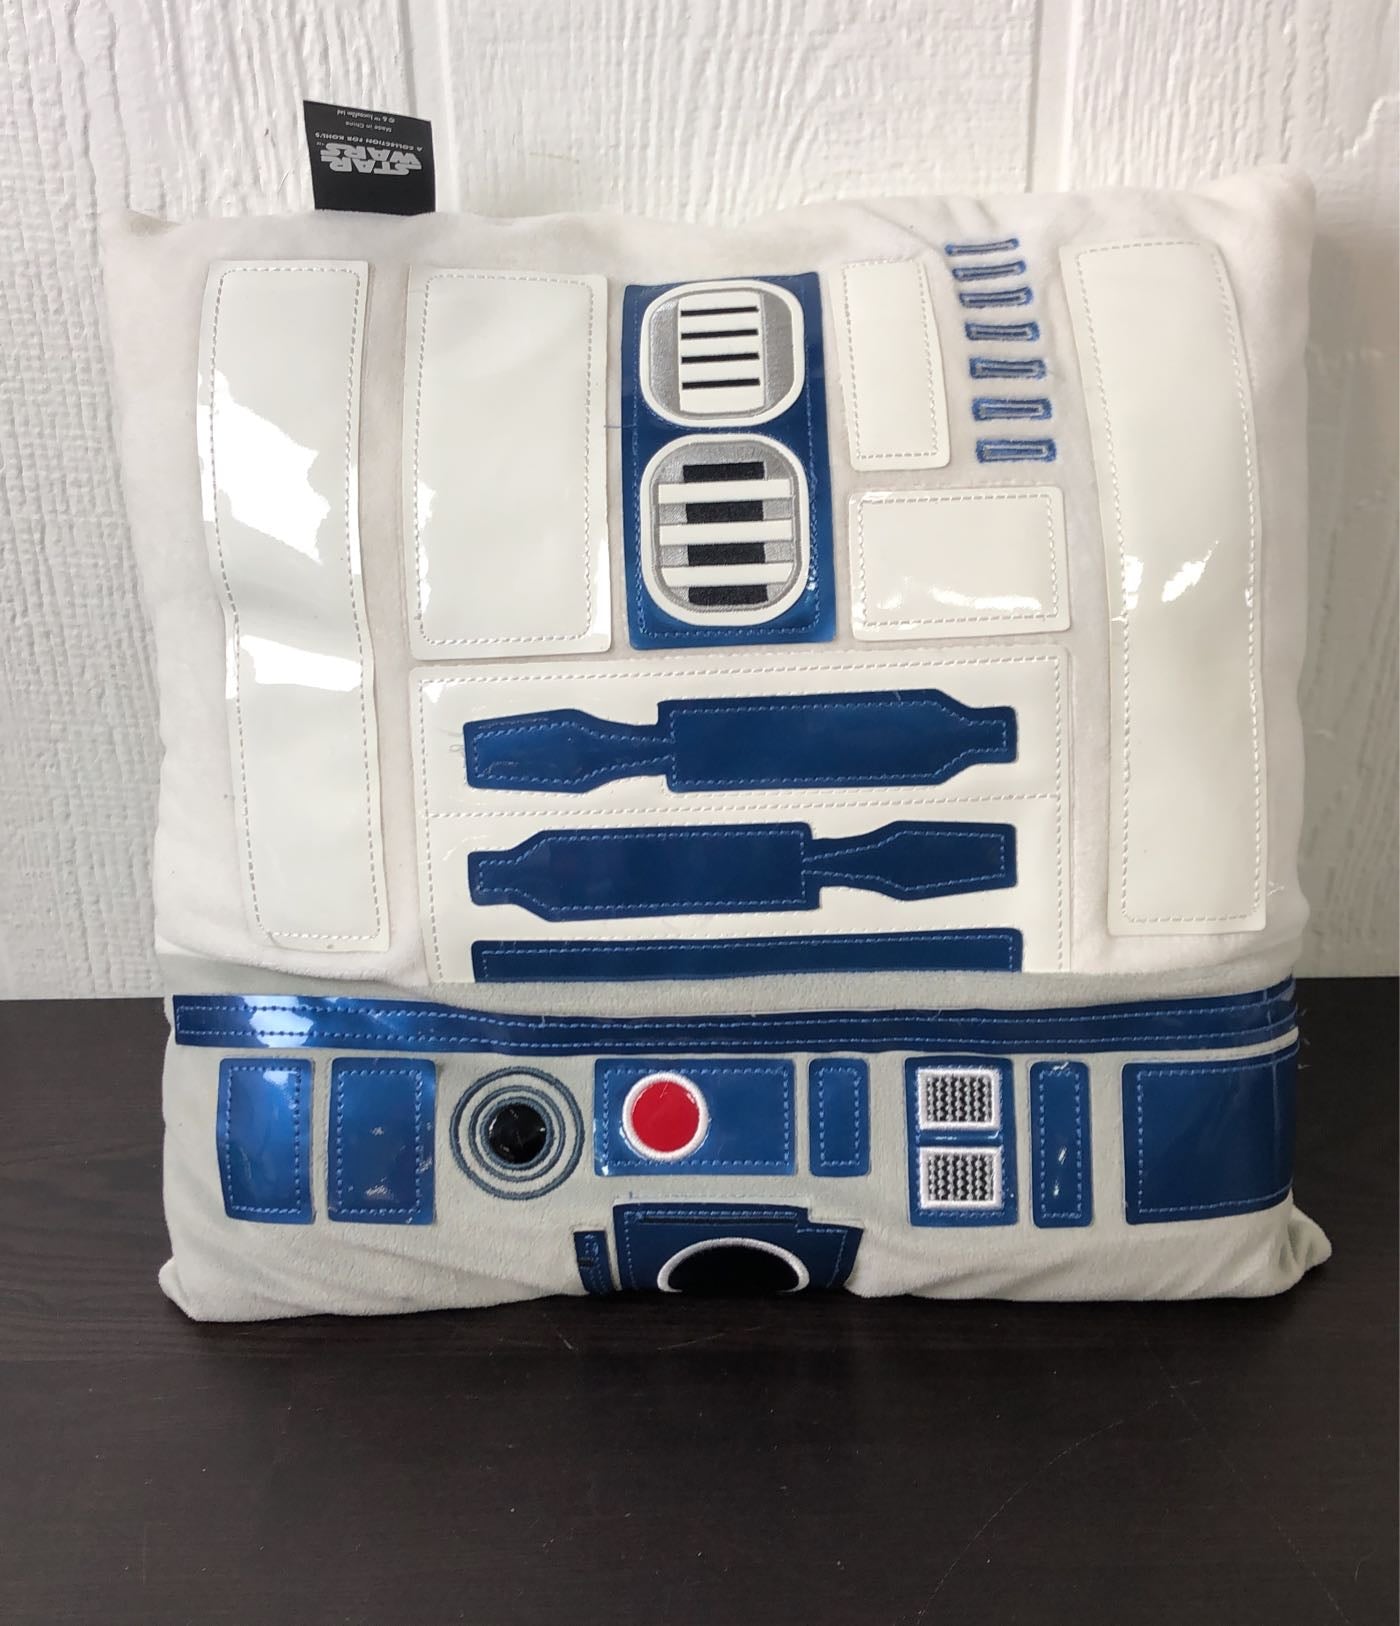 Star Wars Signature R2D2 White/Blue Decorative Throw Pillow – Lambs & Ivy